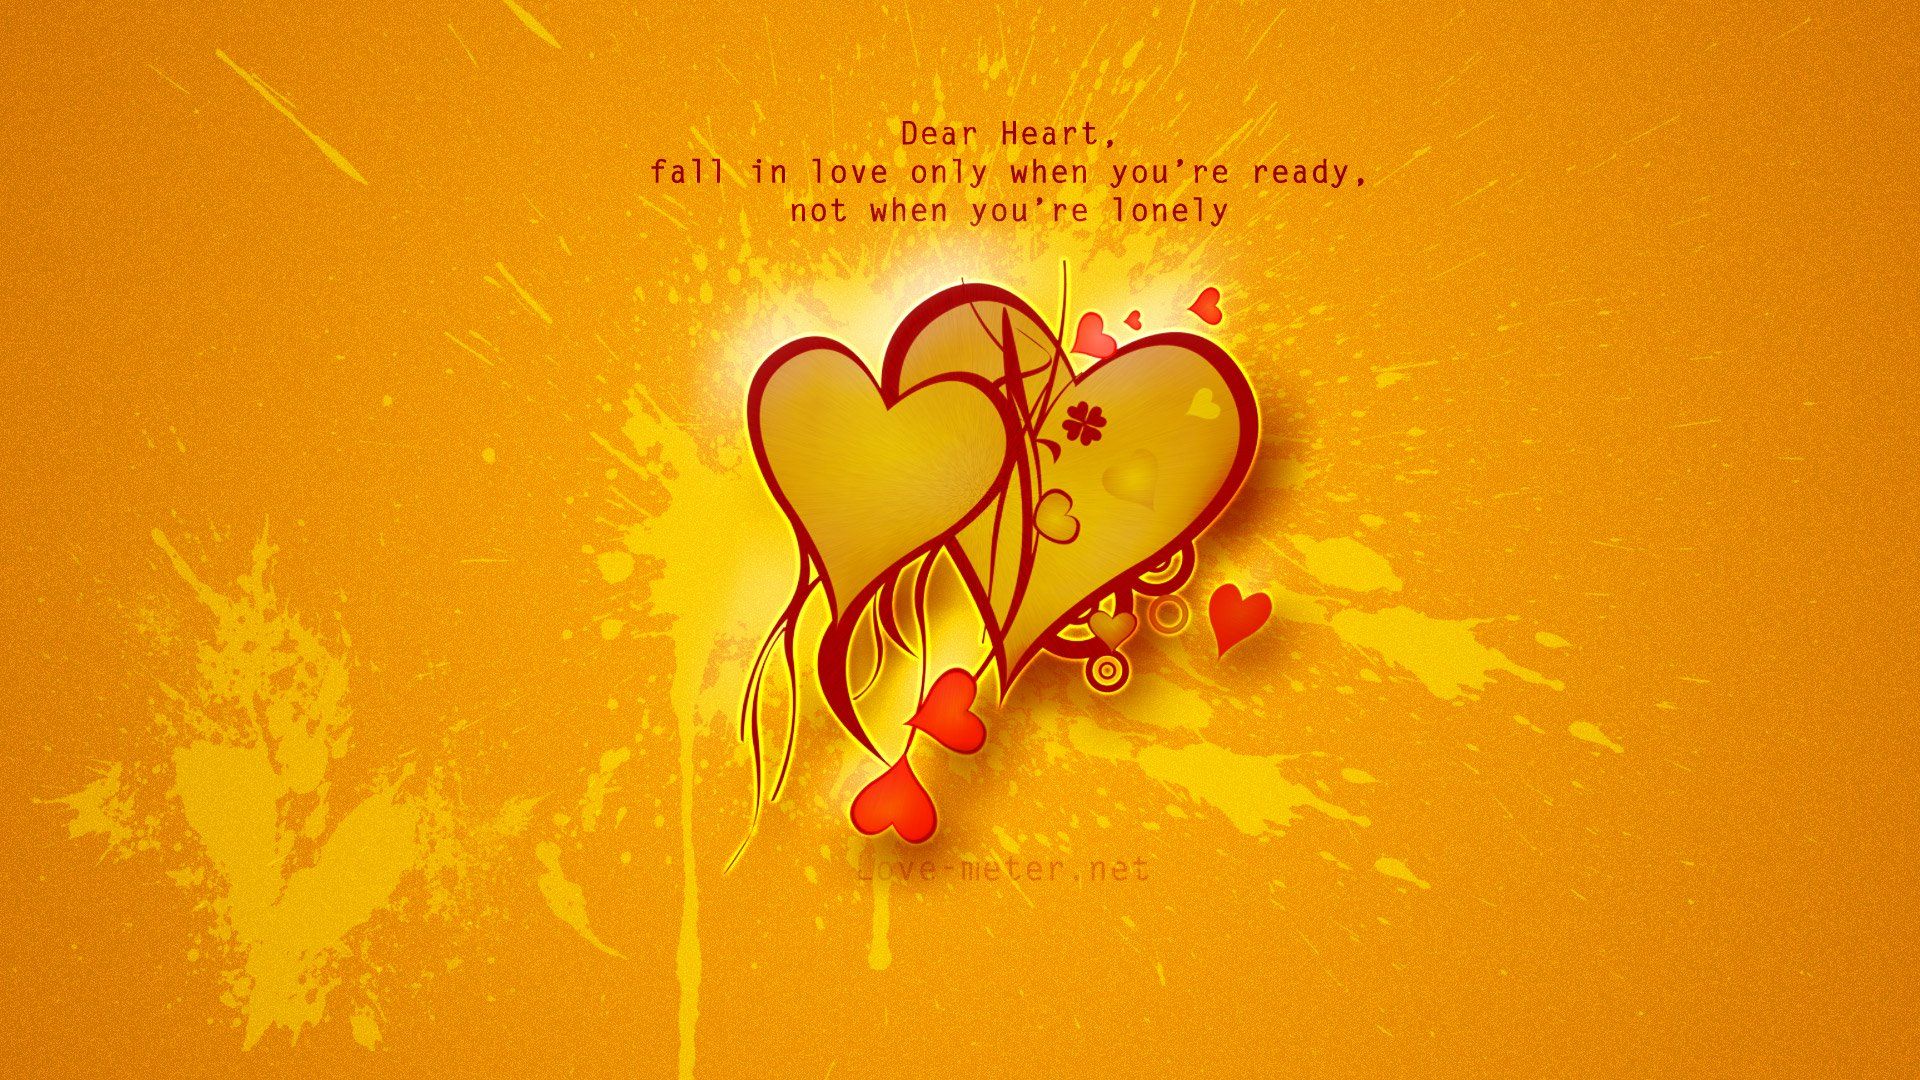 Love Wallpaper With Love Quote - Love Wallpapers and Love Pictures ...